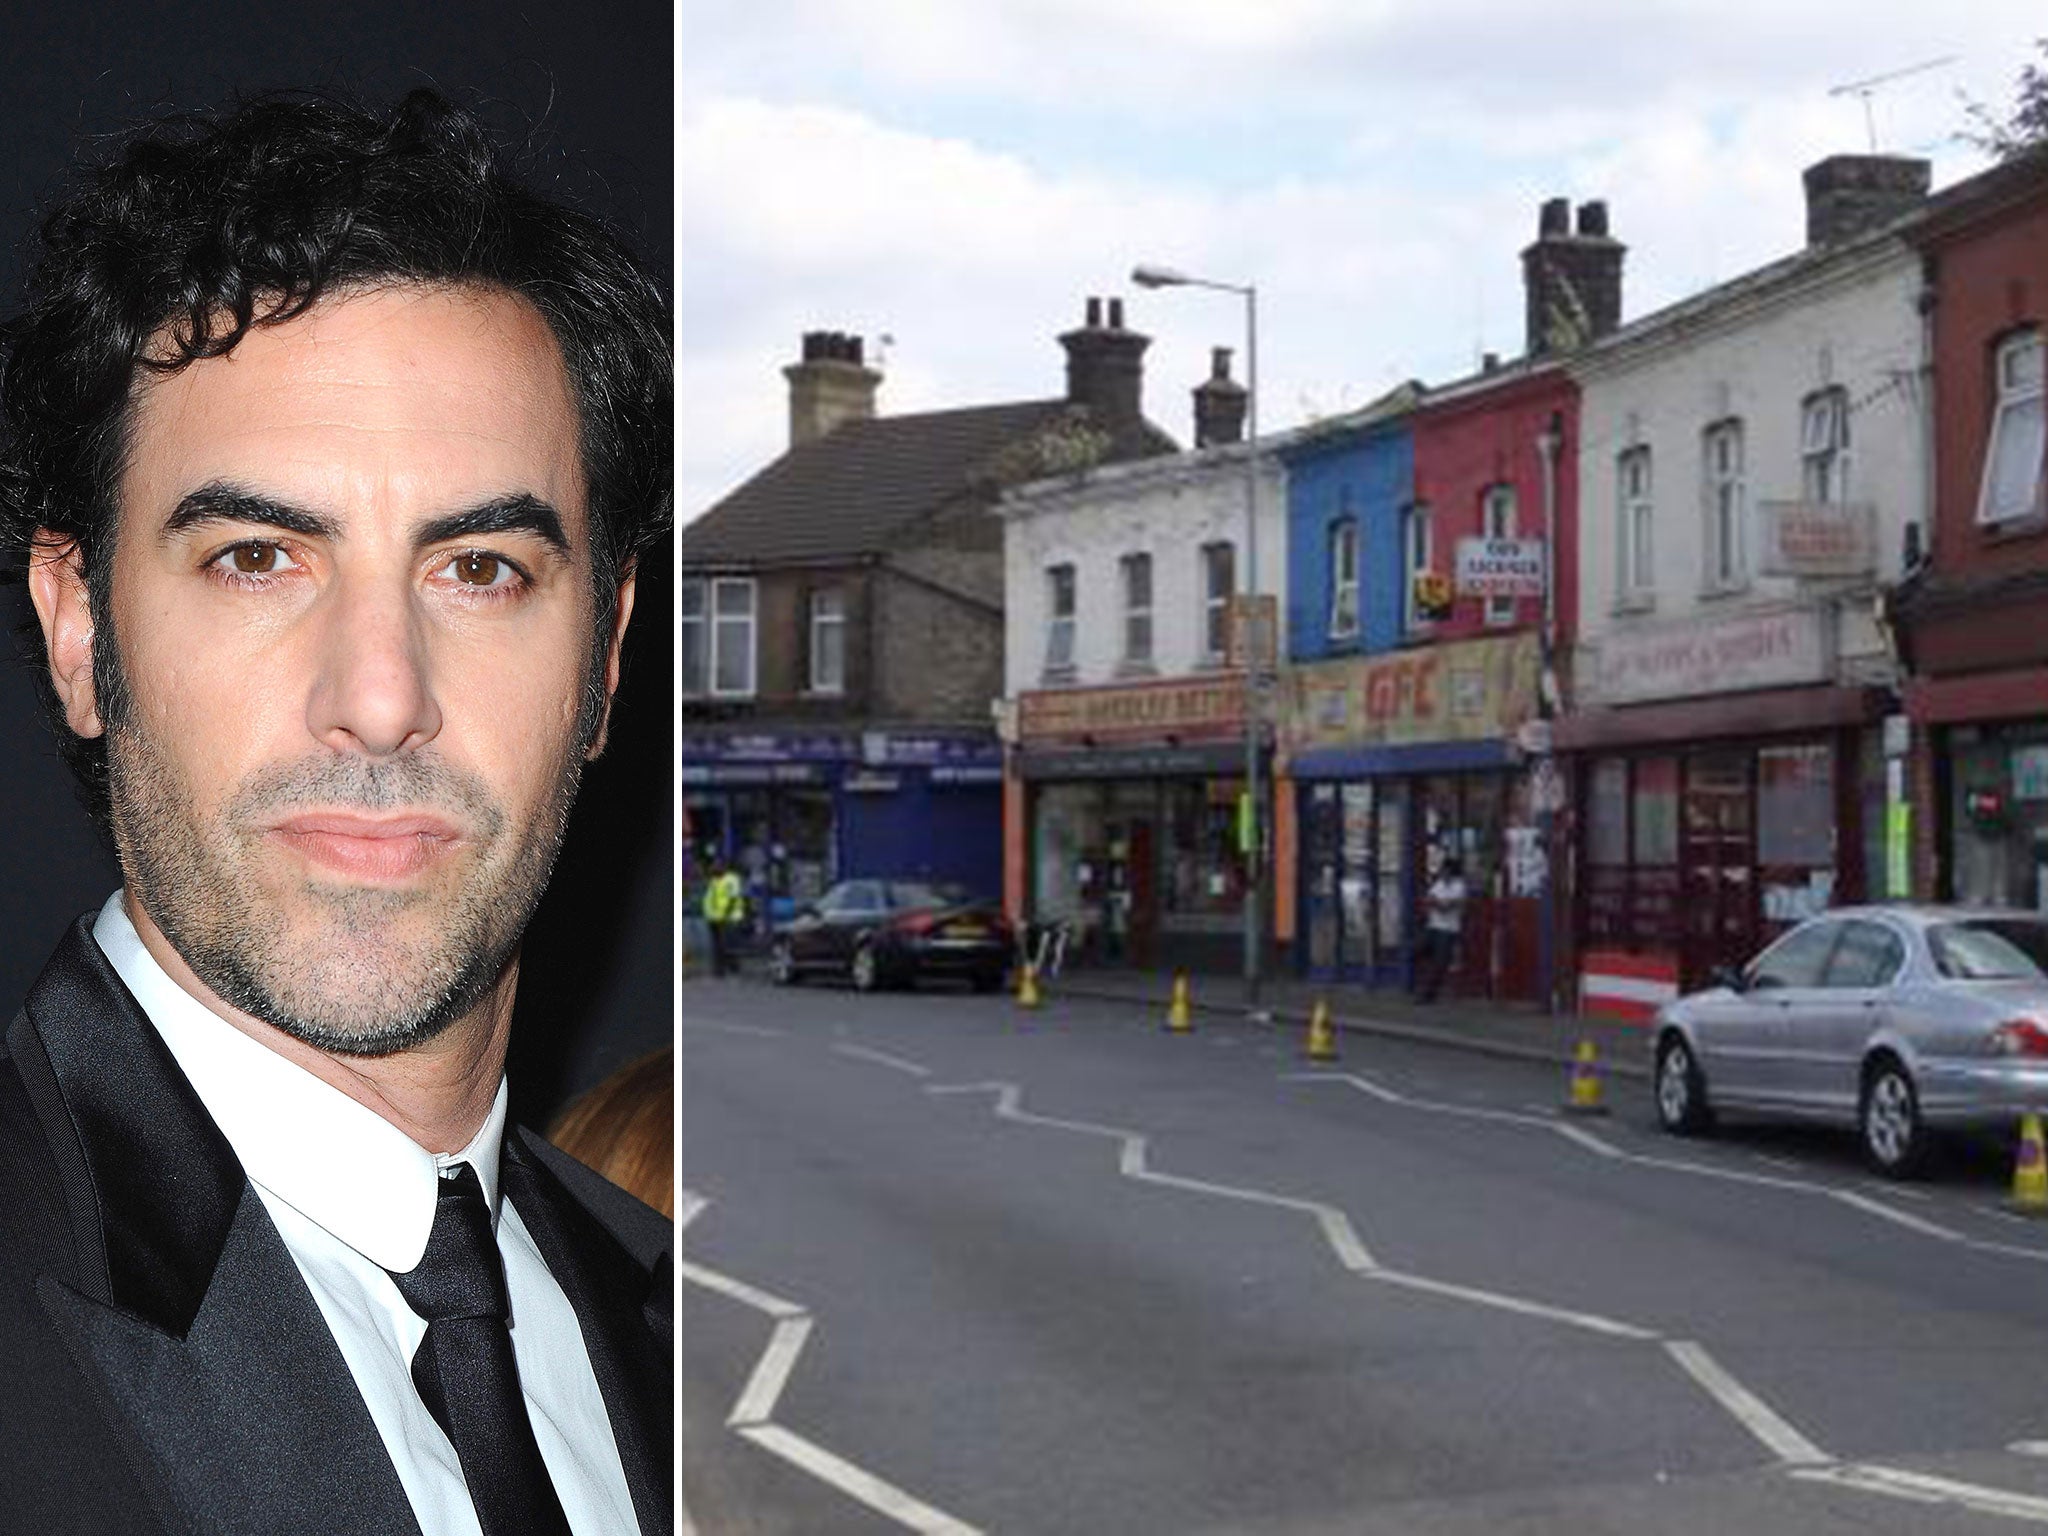 Tilbury in Essex has been transformed into Grimsby in Sacha Baron Cohen's production